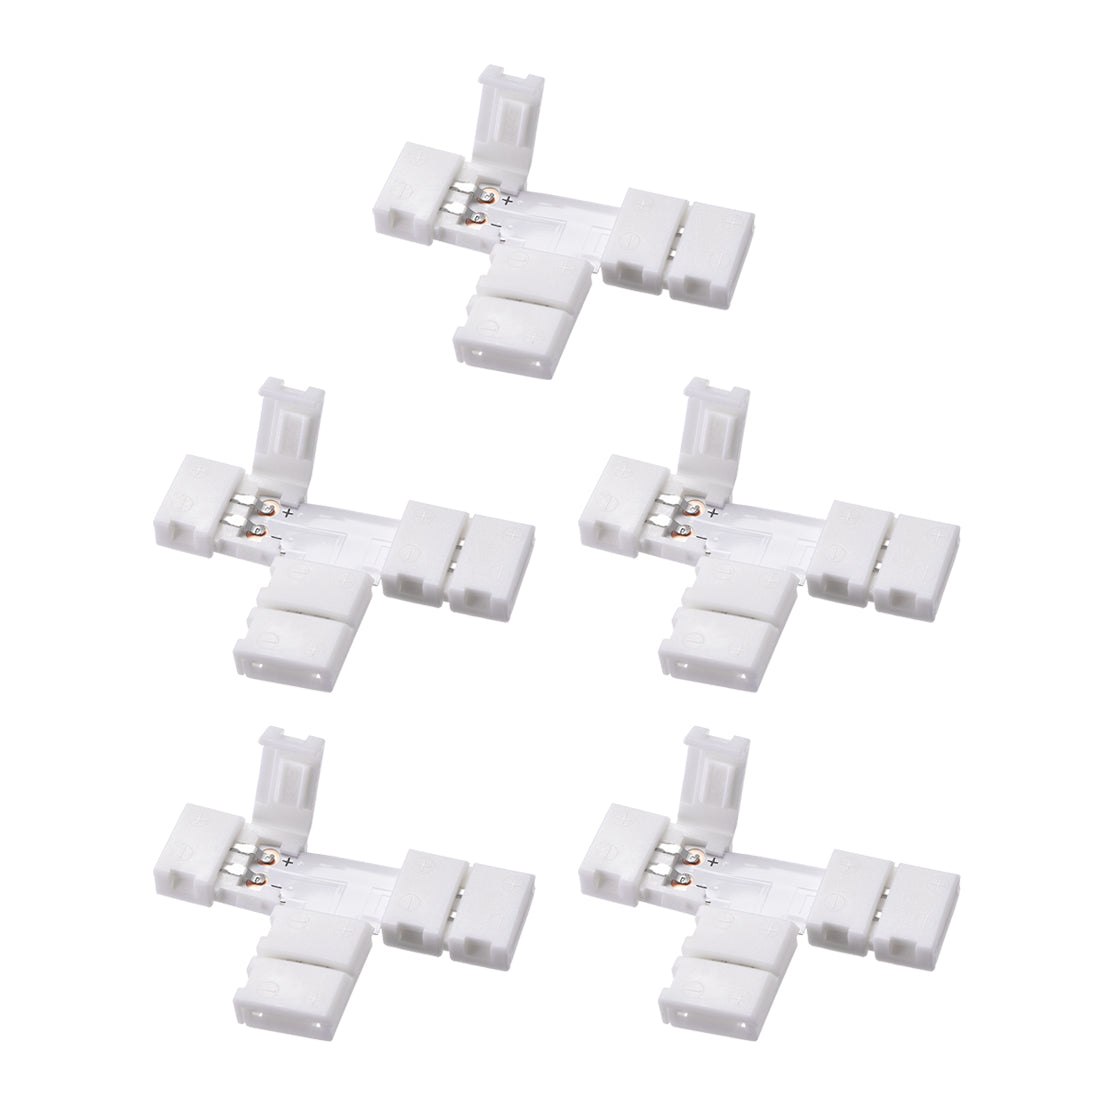 Uxcell Uxcell 8mm 2P T-shape LED Strip Connector for Single Color 3528 2 Conductor LED Strip Lights 5Pcs